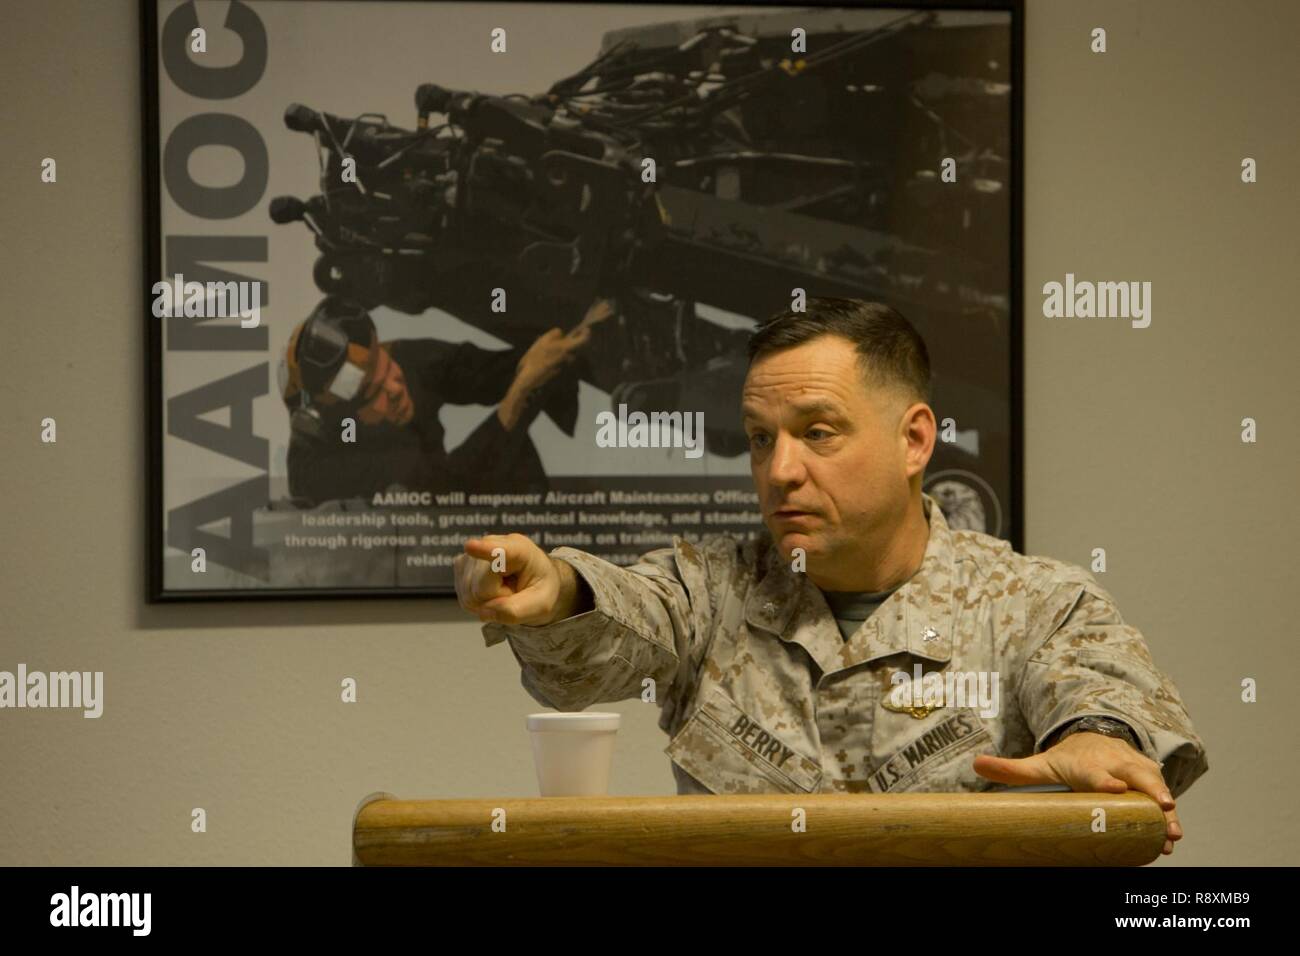 U.S. Marine Corps LtCol. Guy G. Berry, strategy and plans with Headquarters Marine (HQMC) gives a period of instruction about the Aircraft Maintenance Officer Course (AAMOC) at Marine Corps Air Station Yuma, Ariz., on Mar. 14, 2017. AAMOC will empower Aircraft Maintenance Officers with leadership tools, greater technical knowledge, and standardized practices through rigorous academics and hands on training in order to decrease ground related mishaps and increase sortie generation. Stock Photo